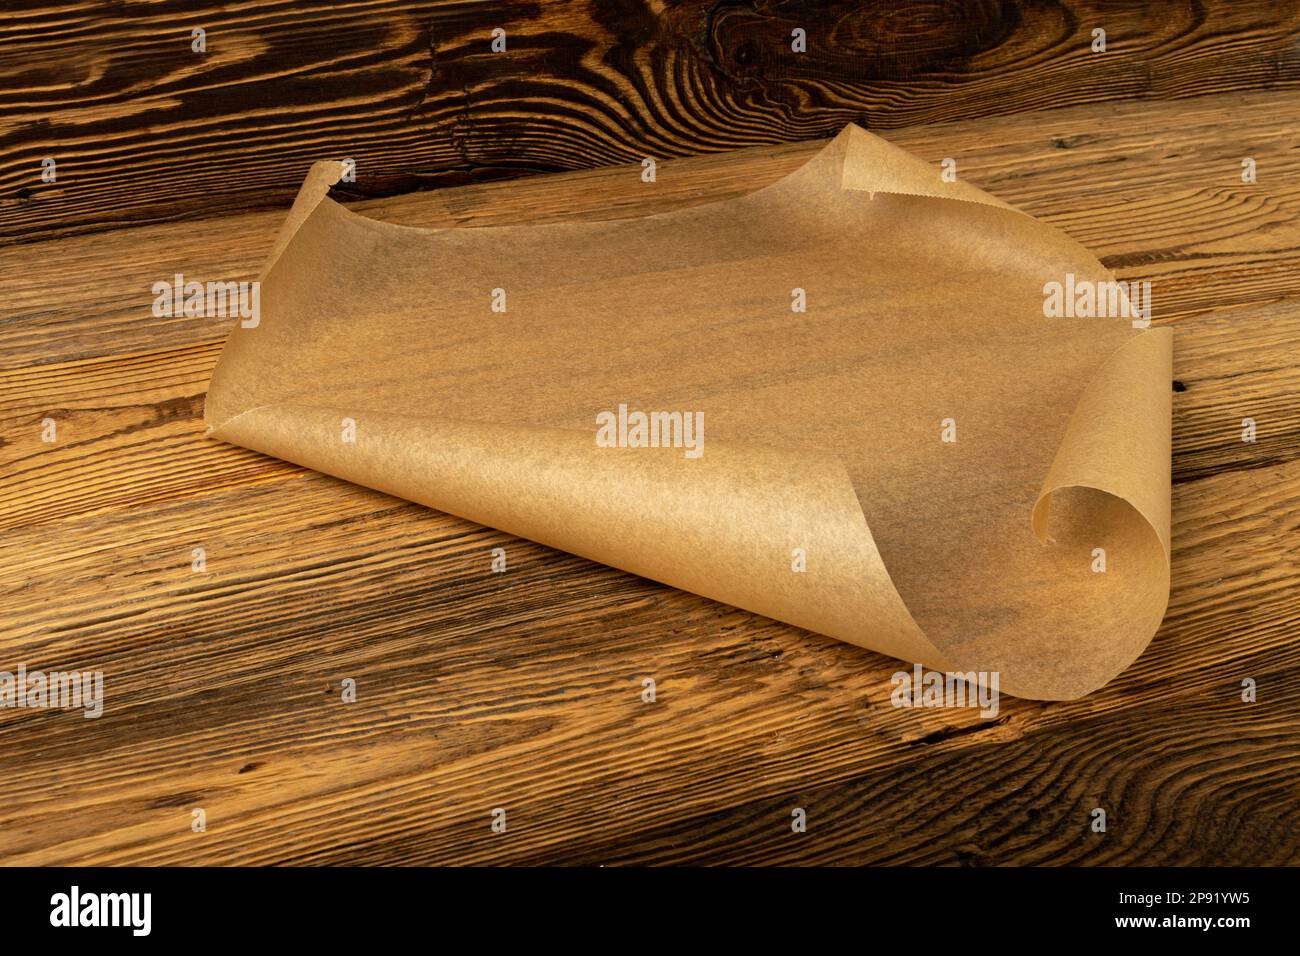 https://c8.alamy.com/comp/2P91YW5/brown-baking-paper-kraft-cooking-paper-sheet-on-wooden-texture-background-bakery-parchment-mockup-greaseproof-baking-paper-2P91YW5.jpg